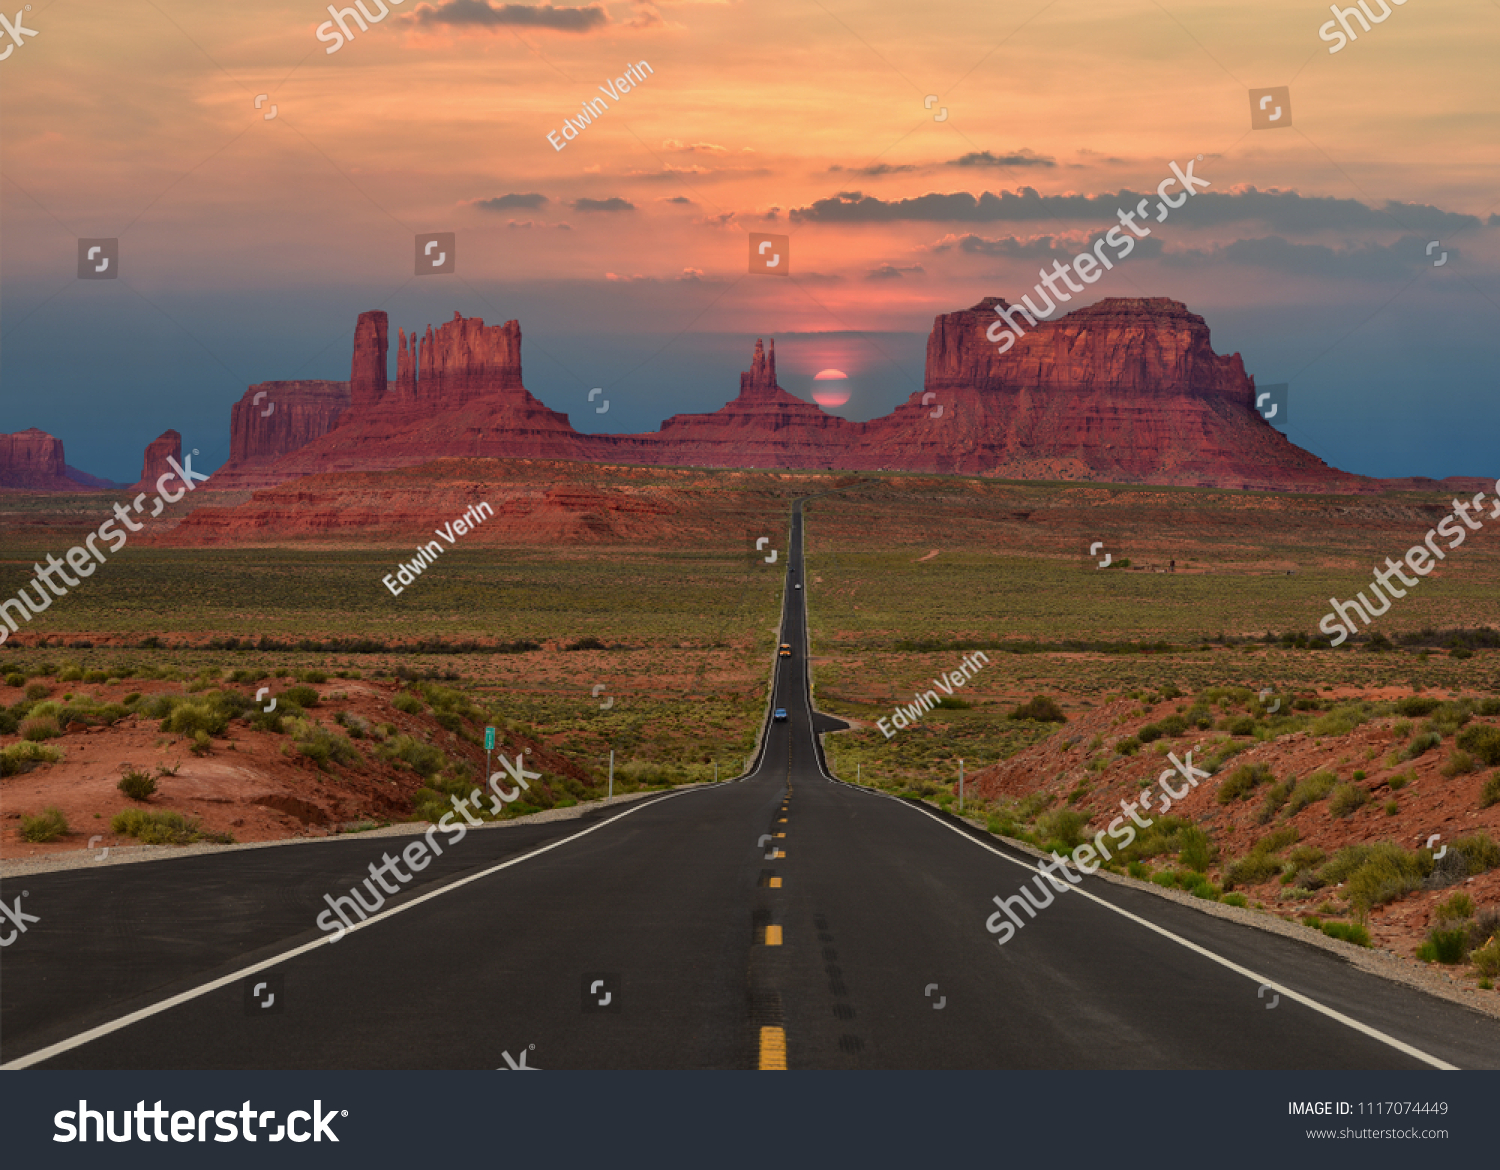 Scenic highway in Monument Valley Tribal Park in Arizona-Utah border, U.S.A. at sunset. #1117074449